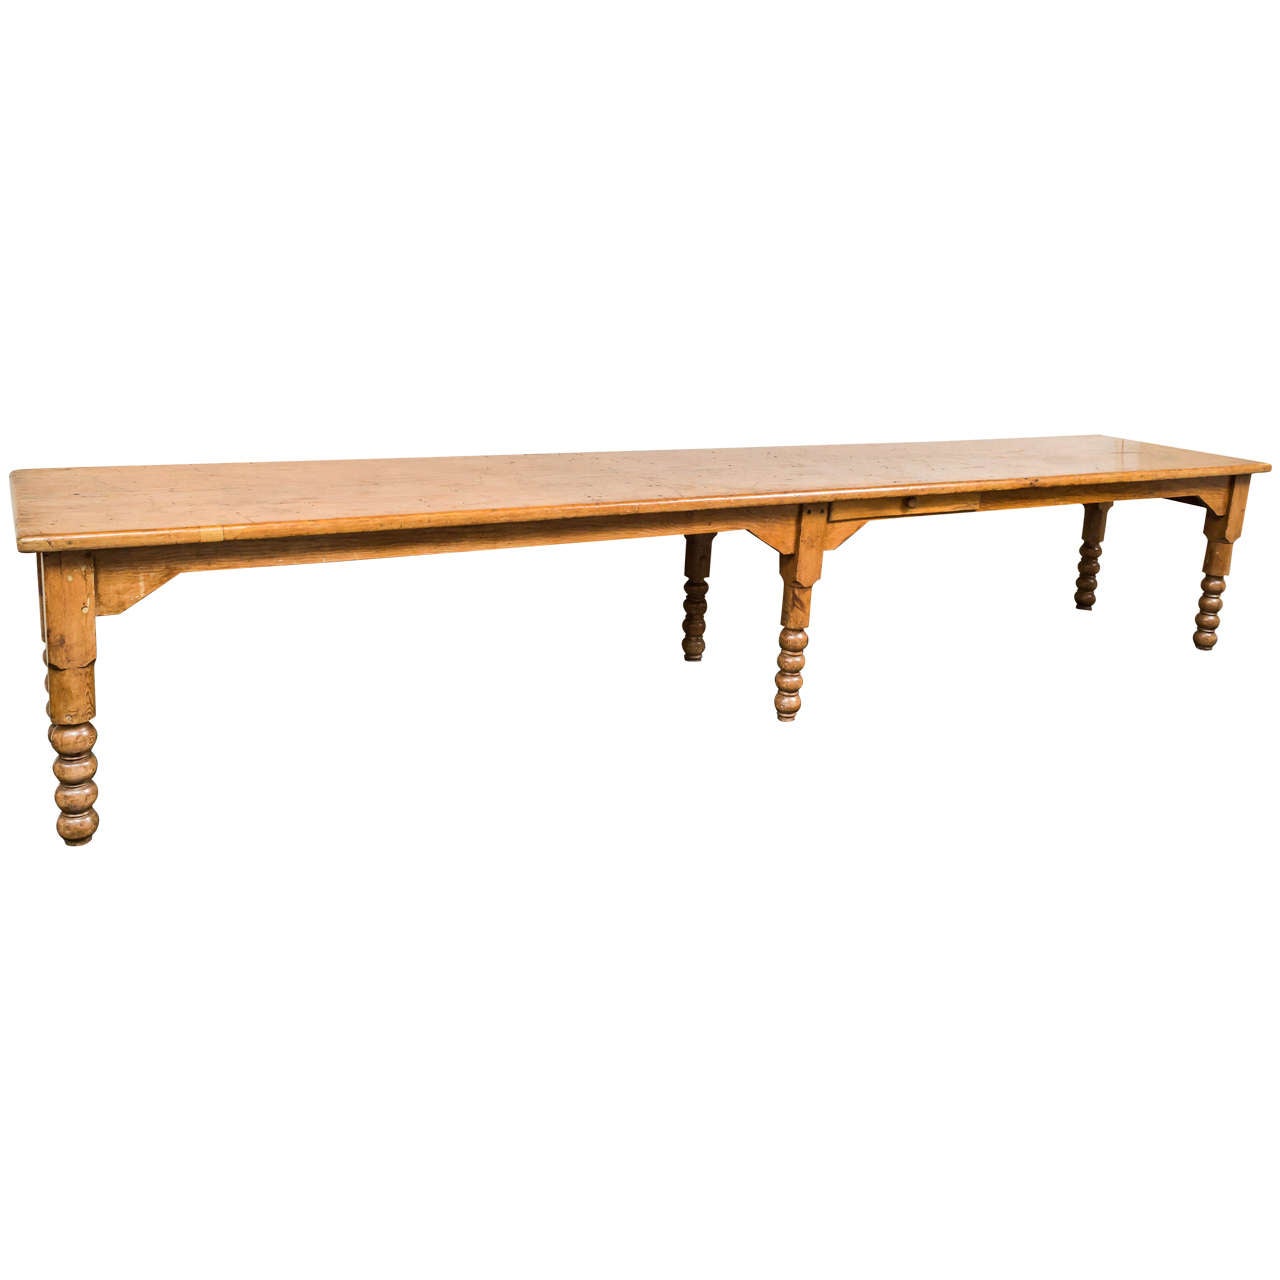 Large-Scale Pine Farm Table, English, circa 1860 For Sale